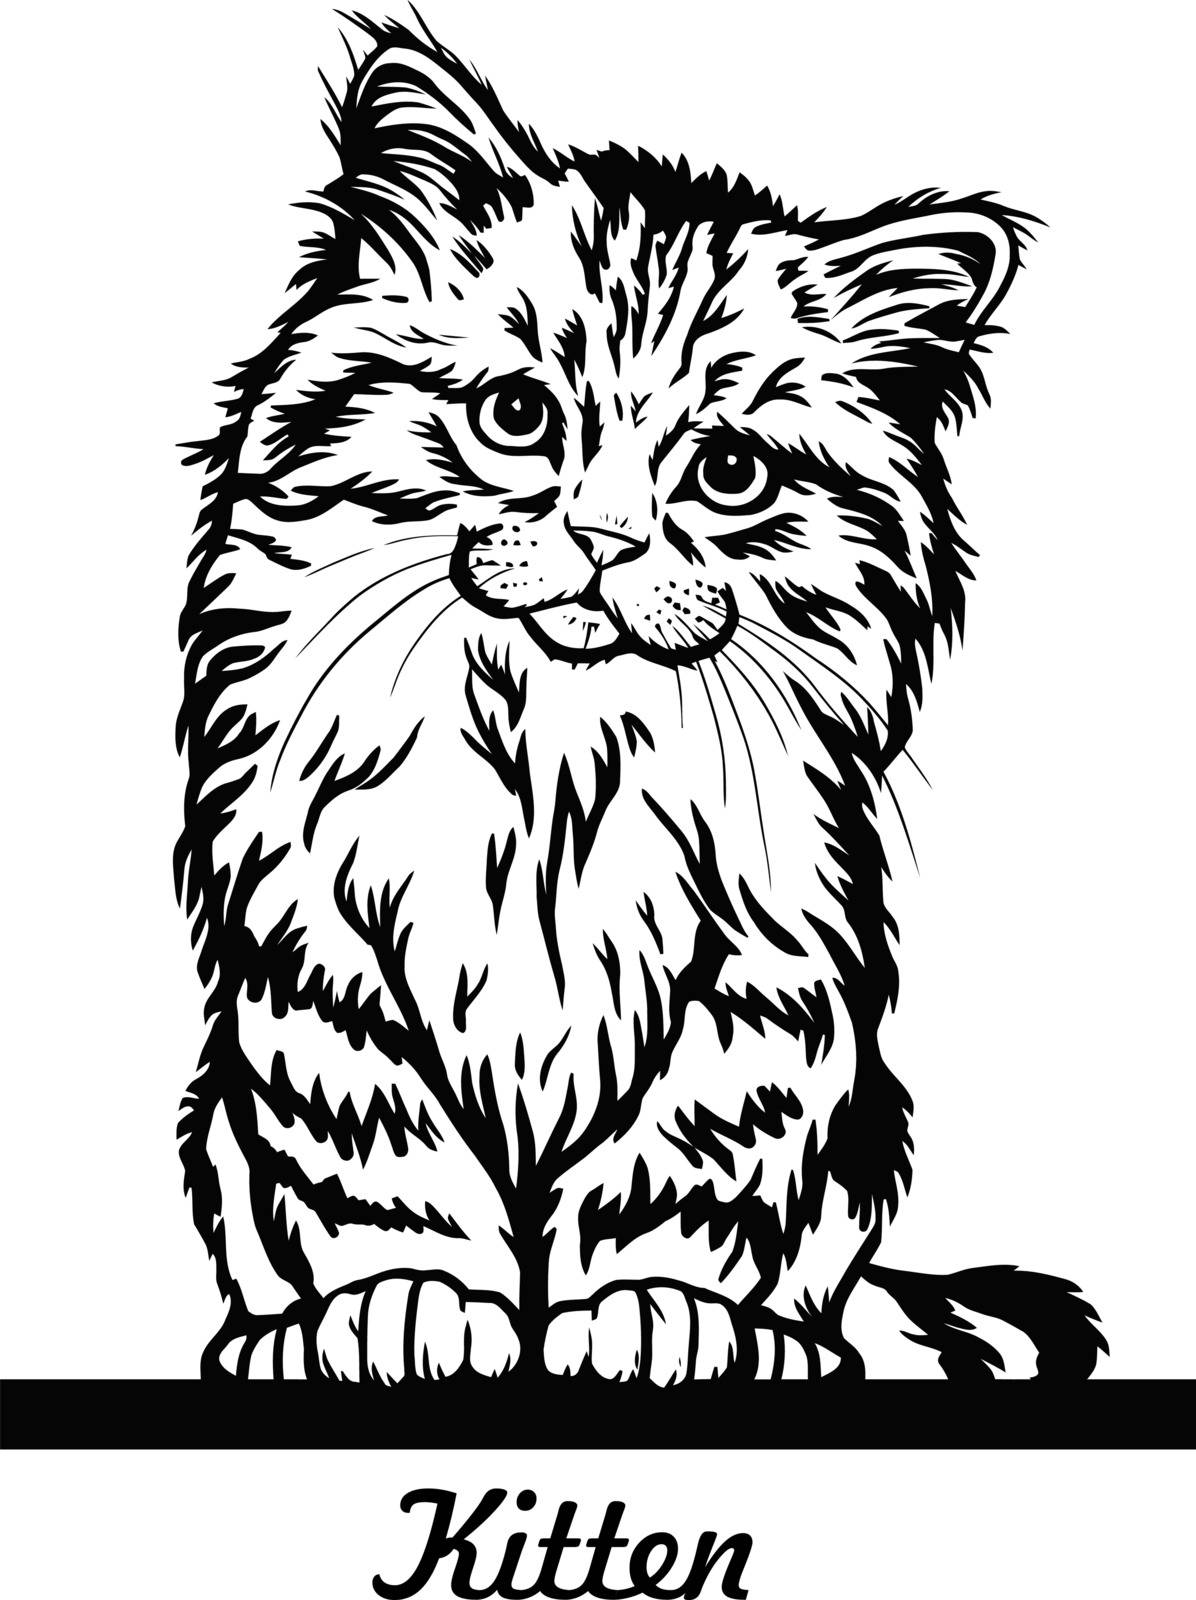 Cute kitten sitting on the line - Cheerful kitty isolated on white - vector stock by digitalclipart